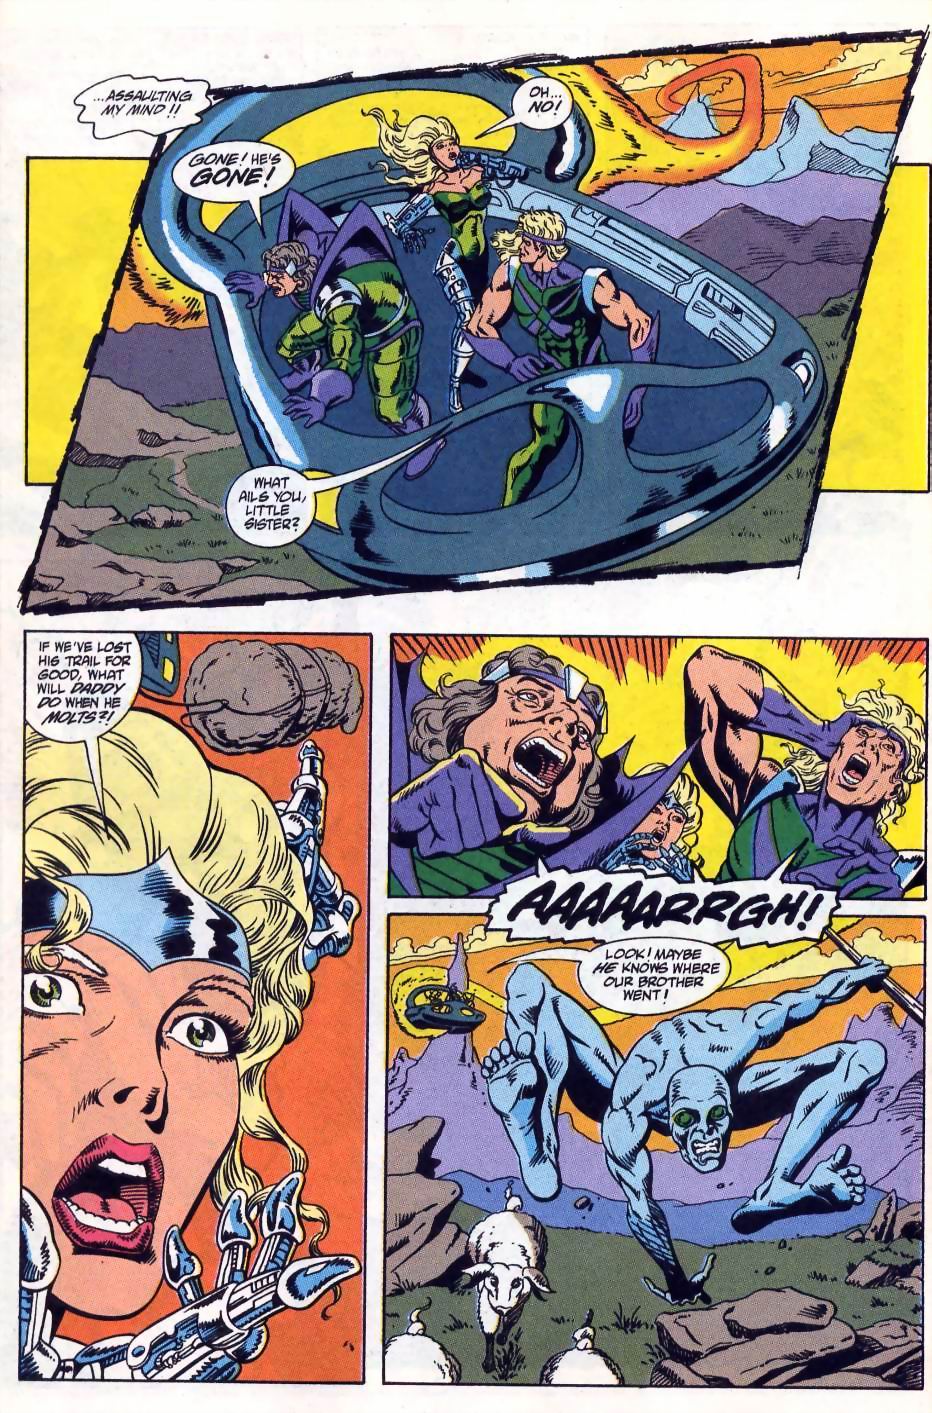 Justice League International (1993) 58 Page 17